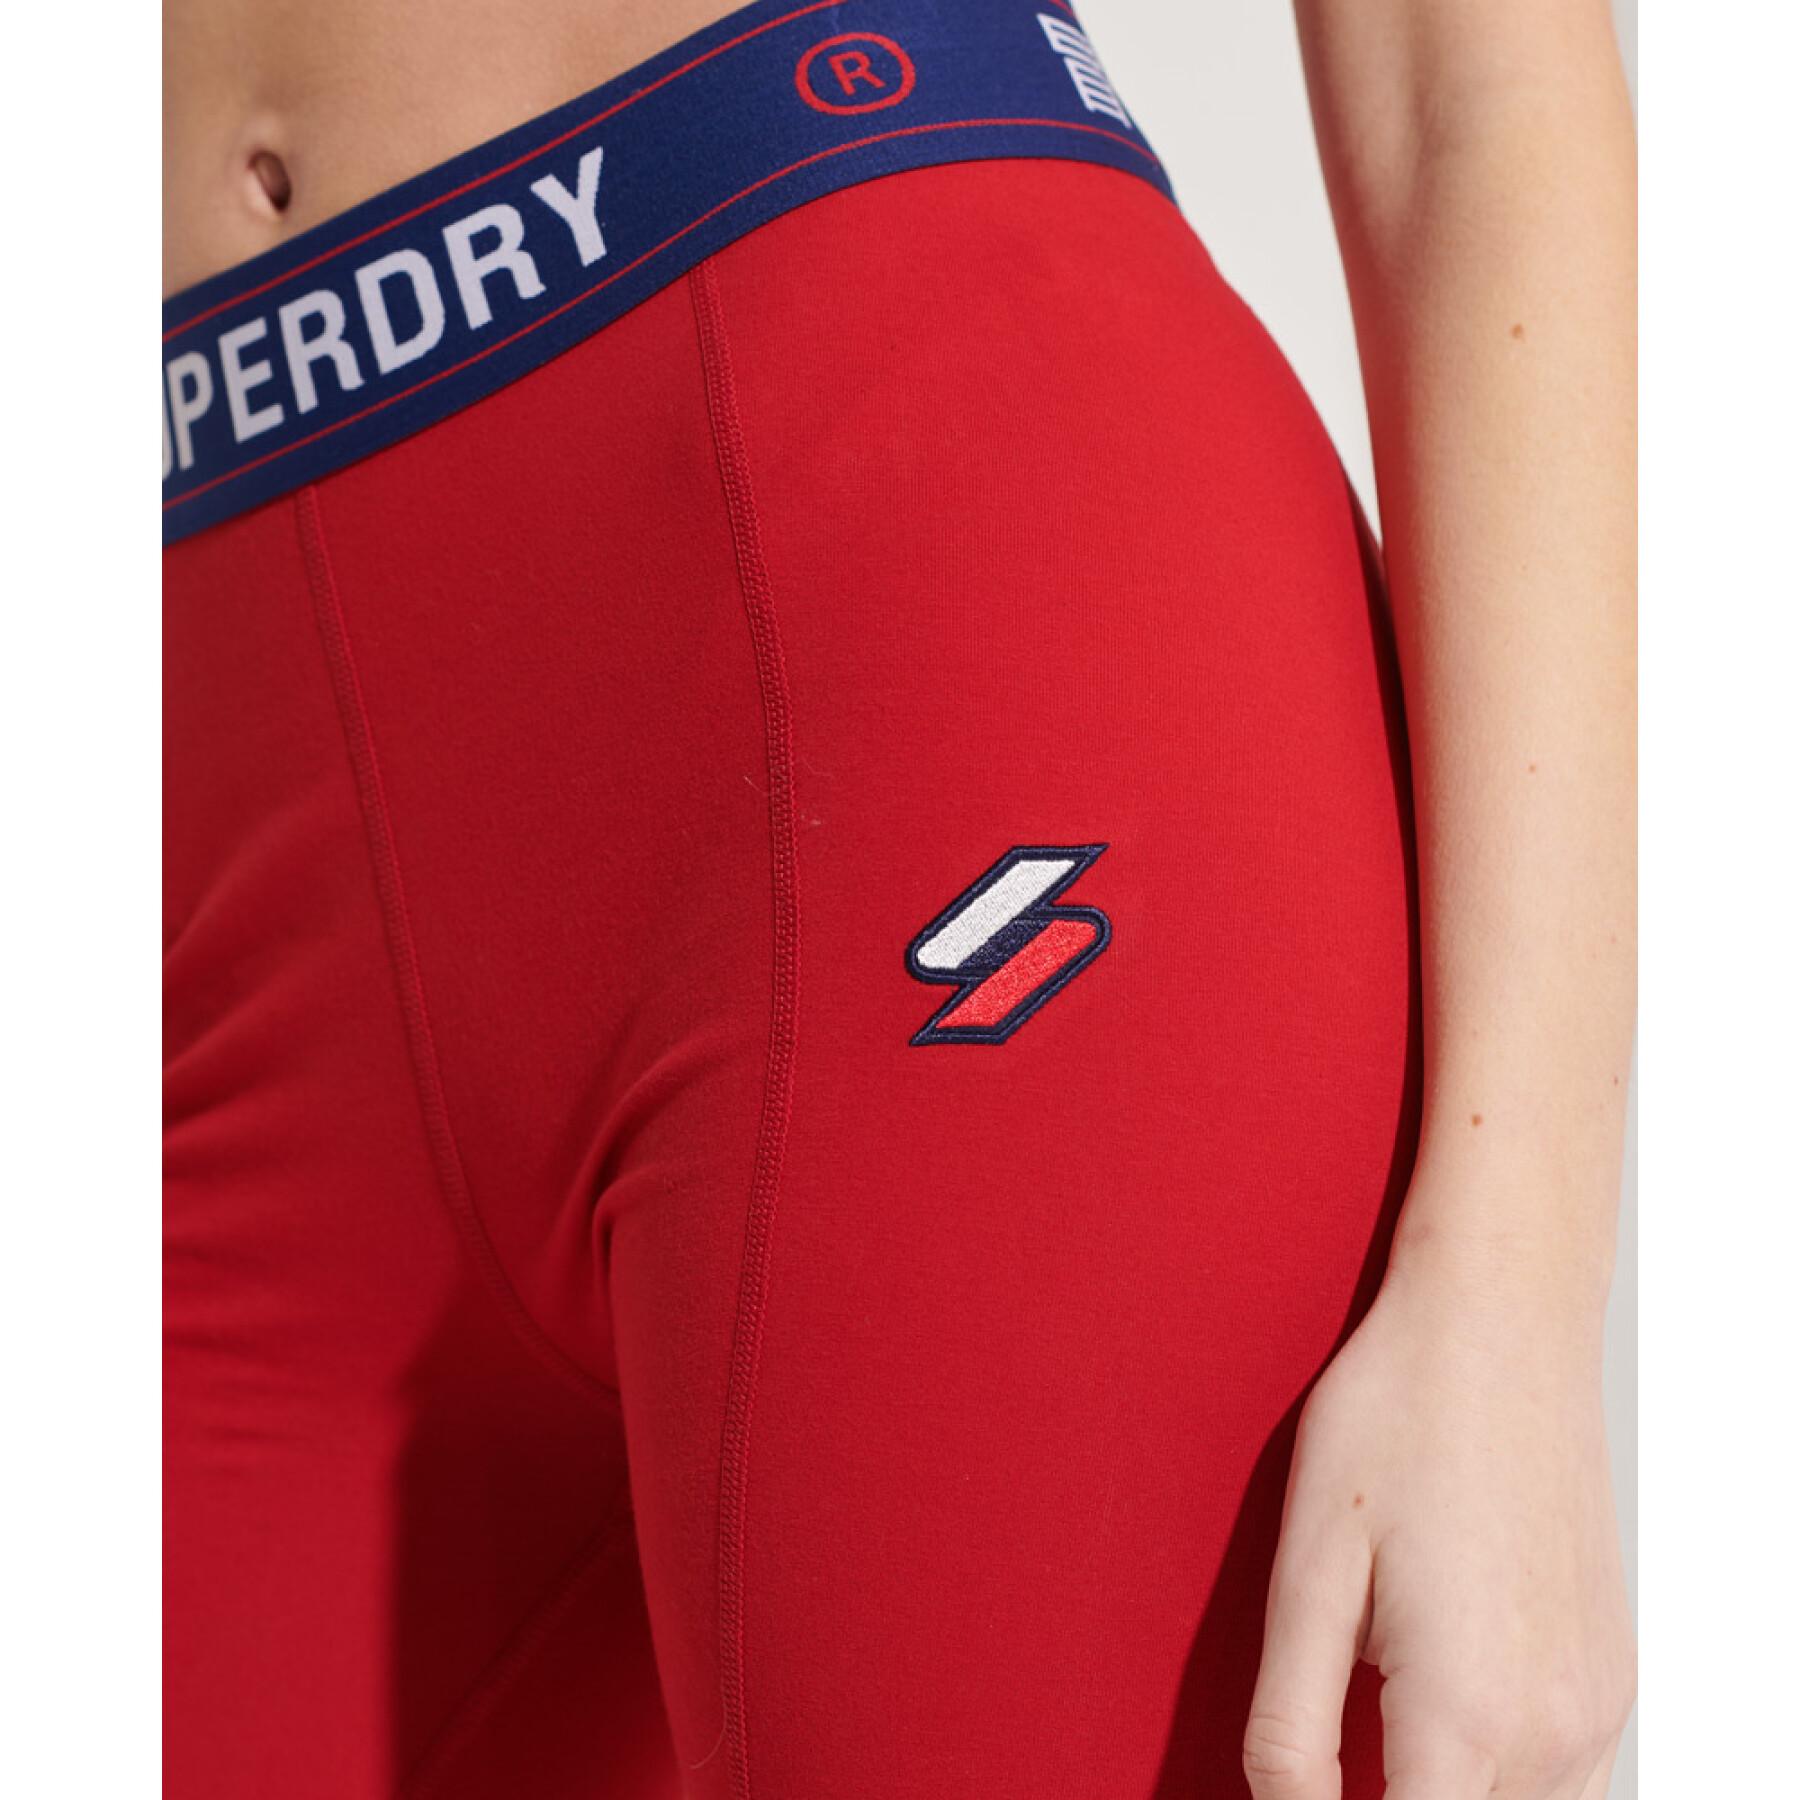 Cycliste femme Superdry Sportstyle Essential